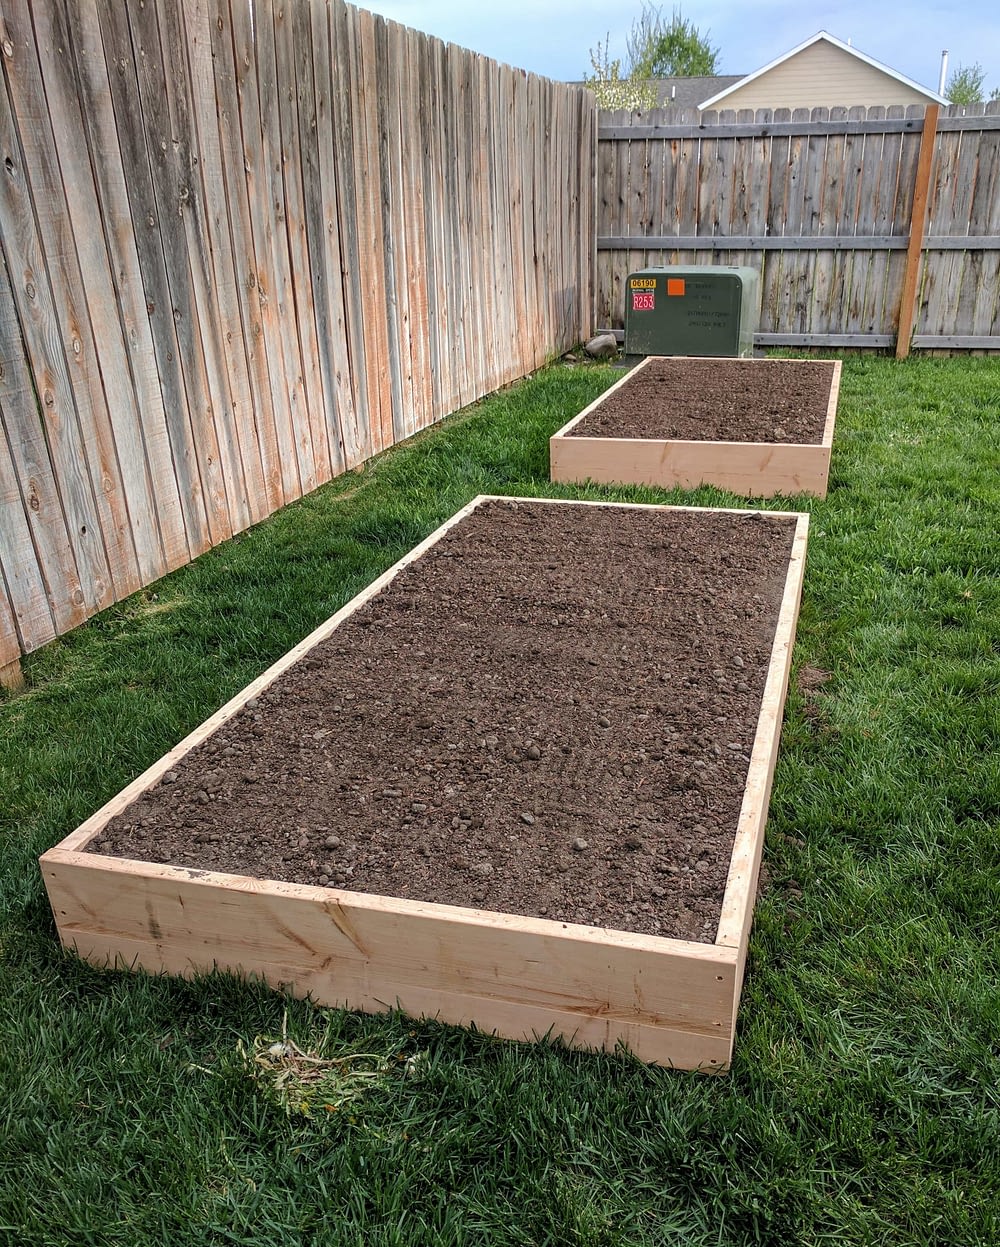 Two raised garden beds full of soil ready to be planted